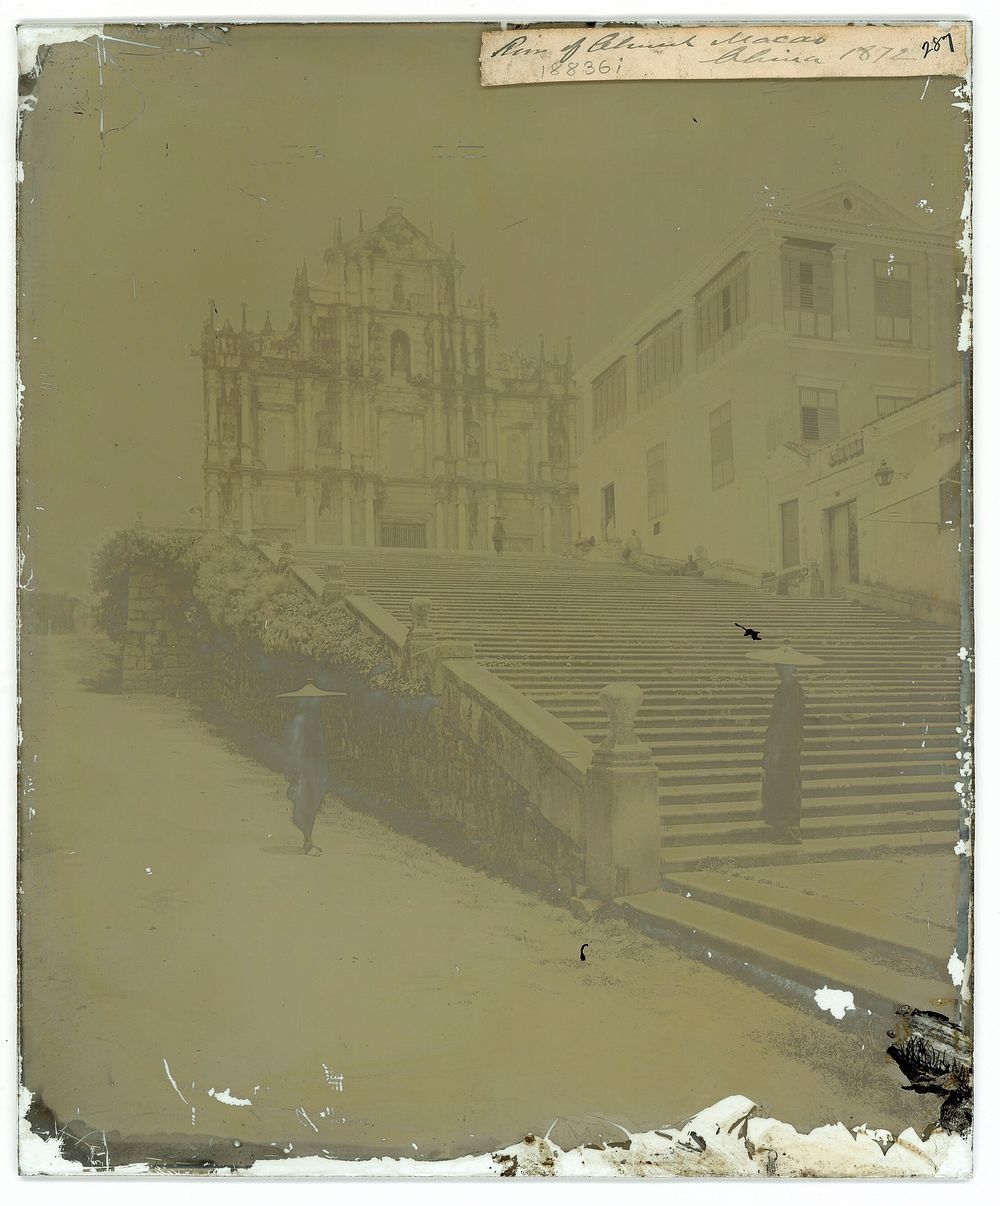 Macao, China: the ruins of St Paul's church. Photograph by John Thomson, 1870.